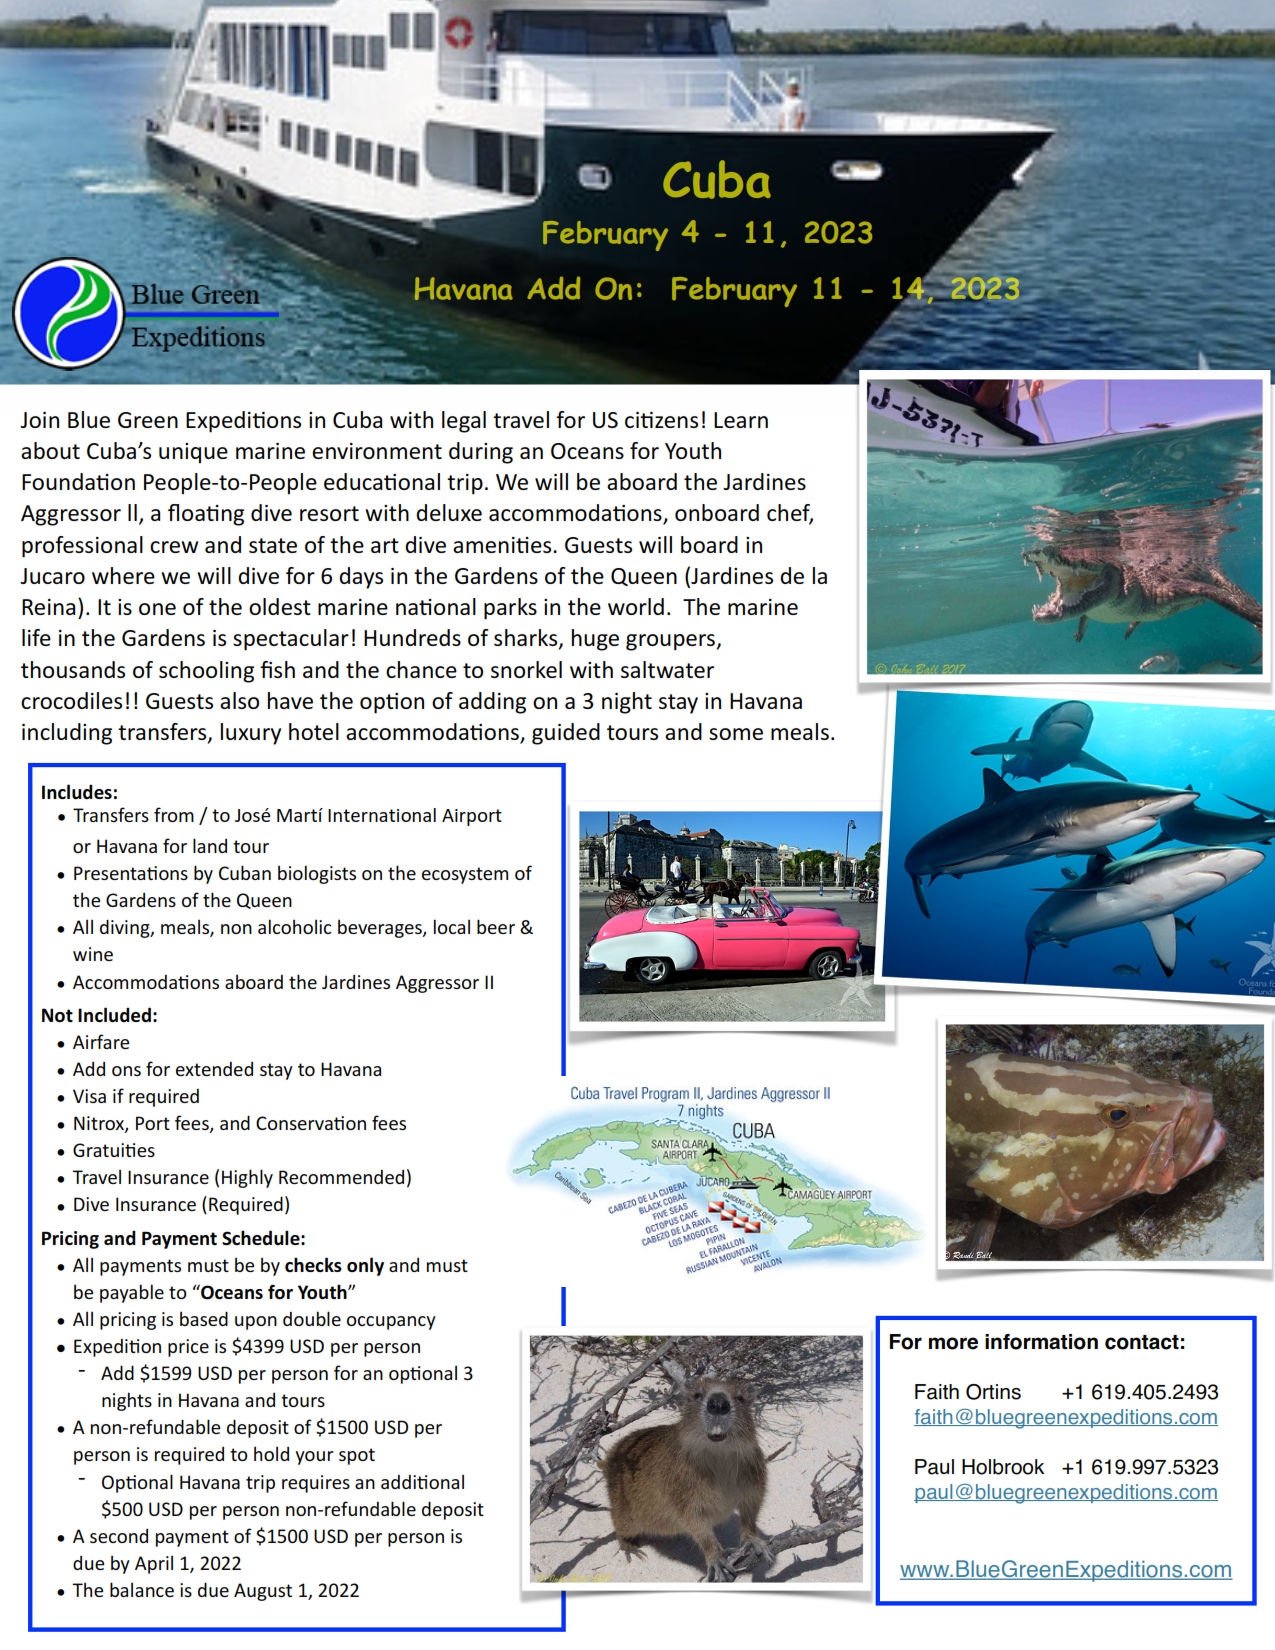 Cuba, February 11 - 14, 2023, expedition description and pricing. PDF flyer contains the same information.